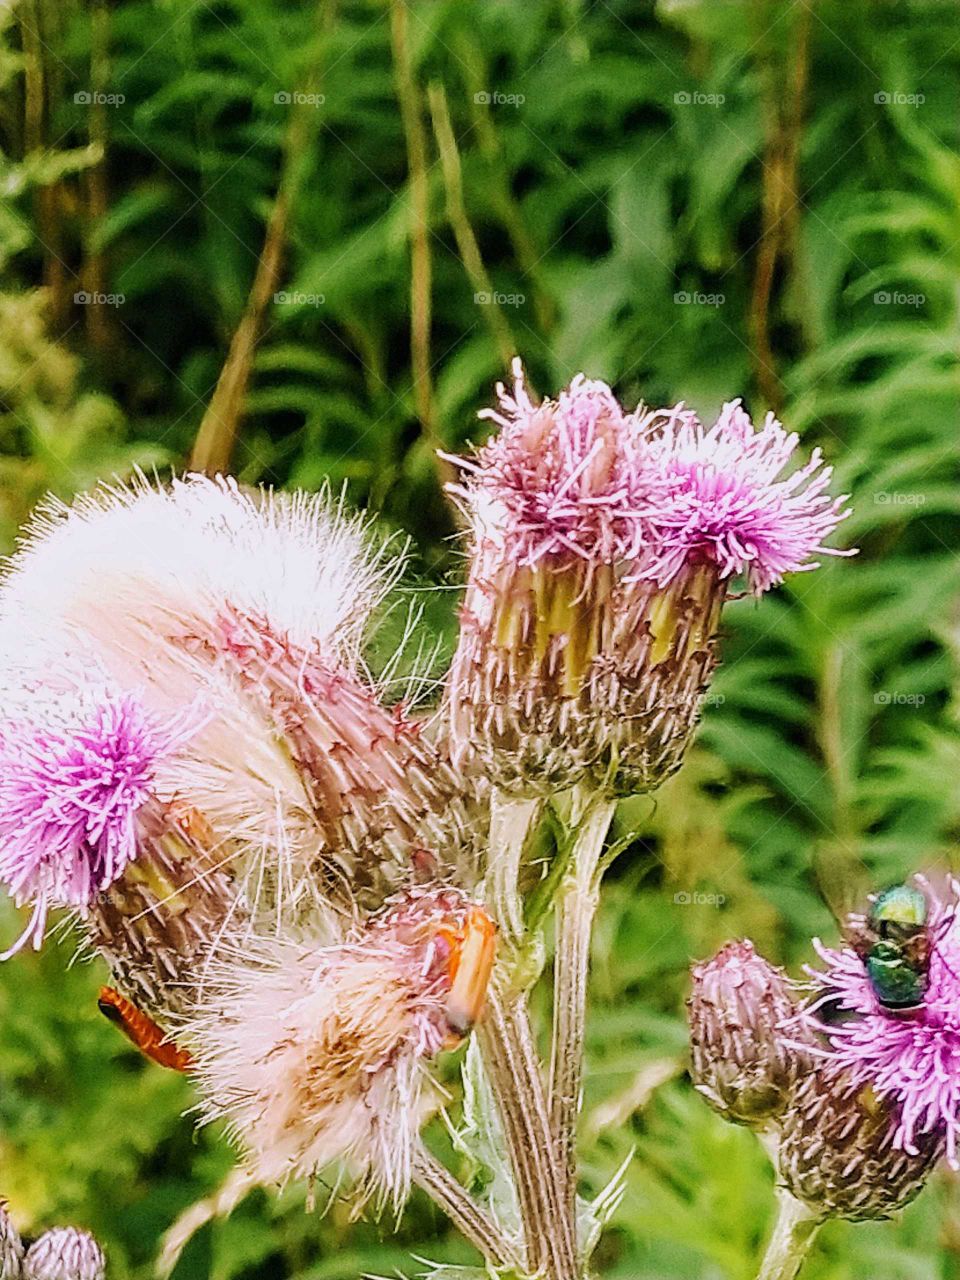 Creeping Thistle & Friends.